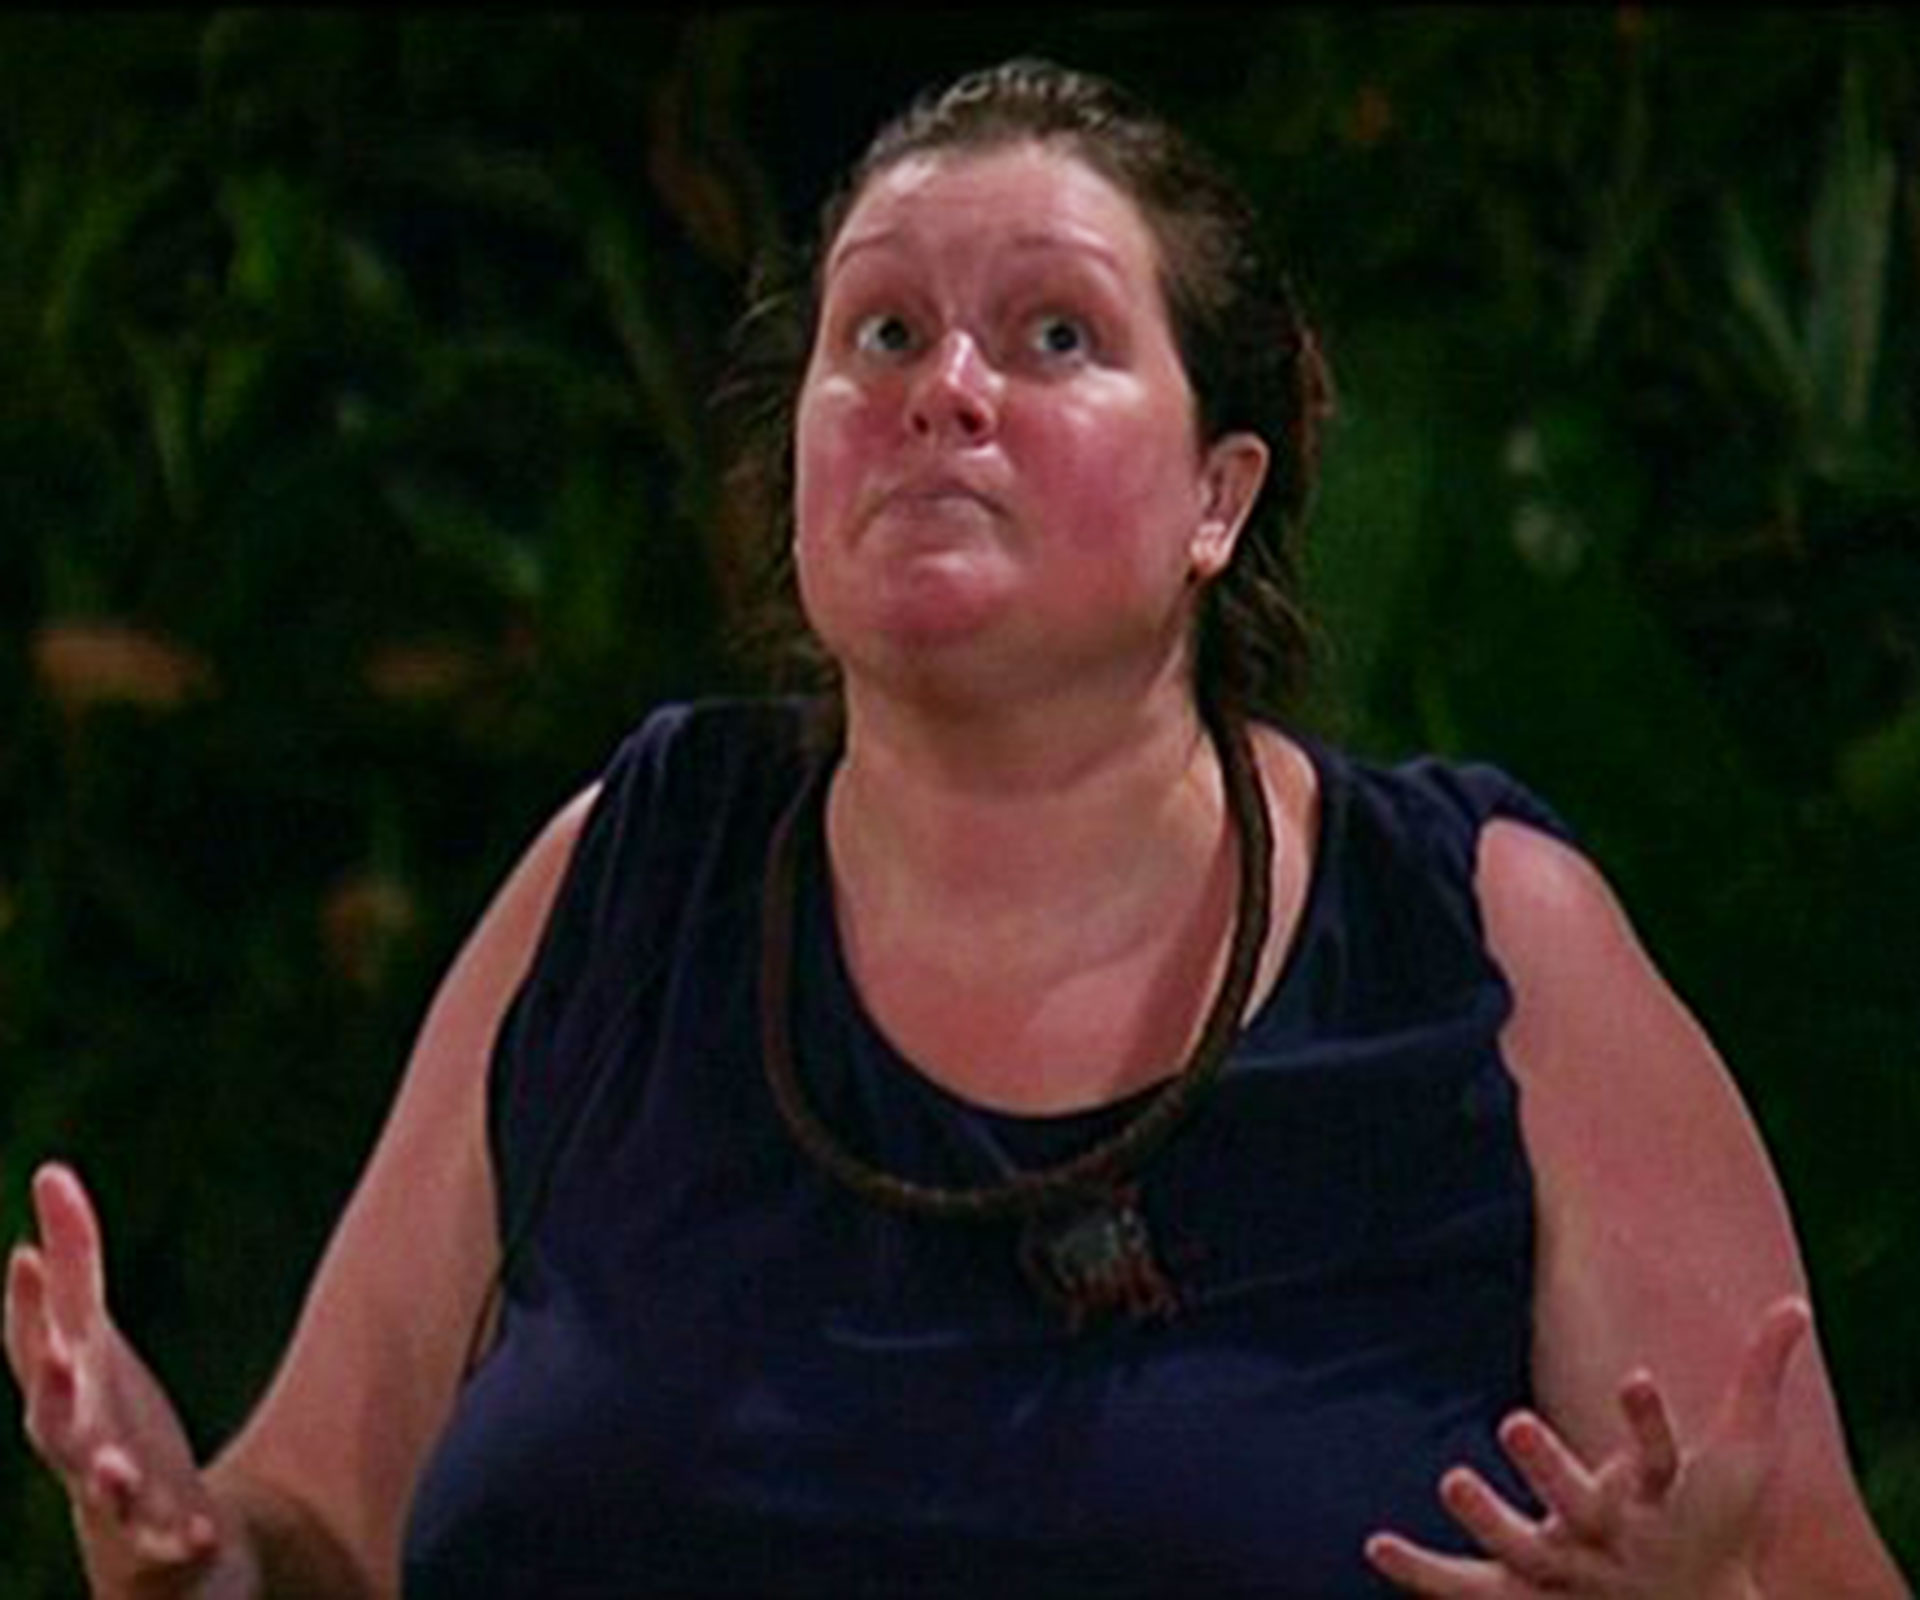 tziporah malkah, i'm a celebrity get me out of here